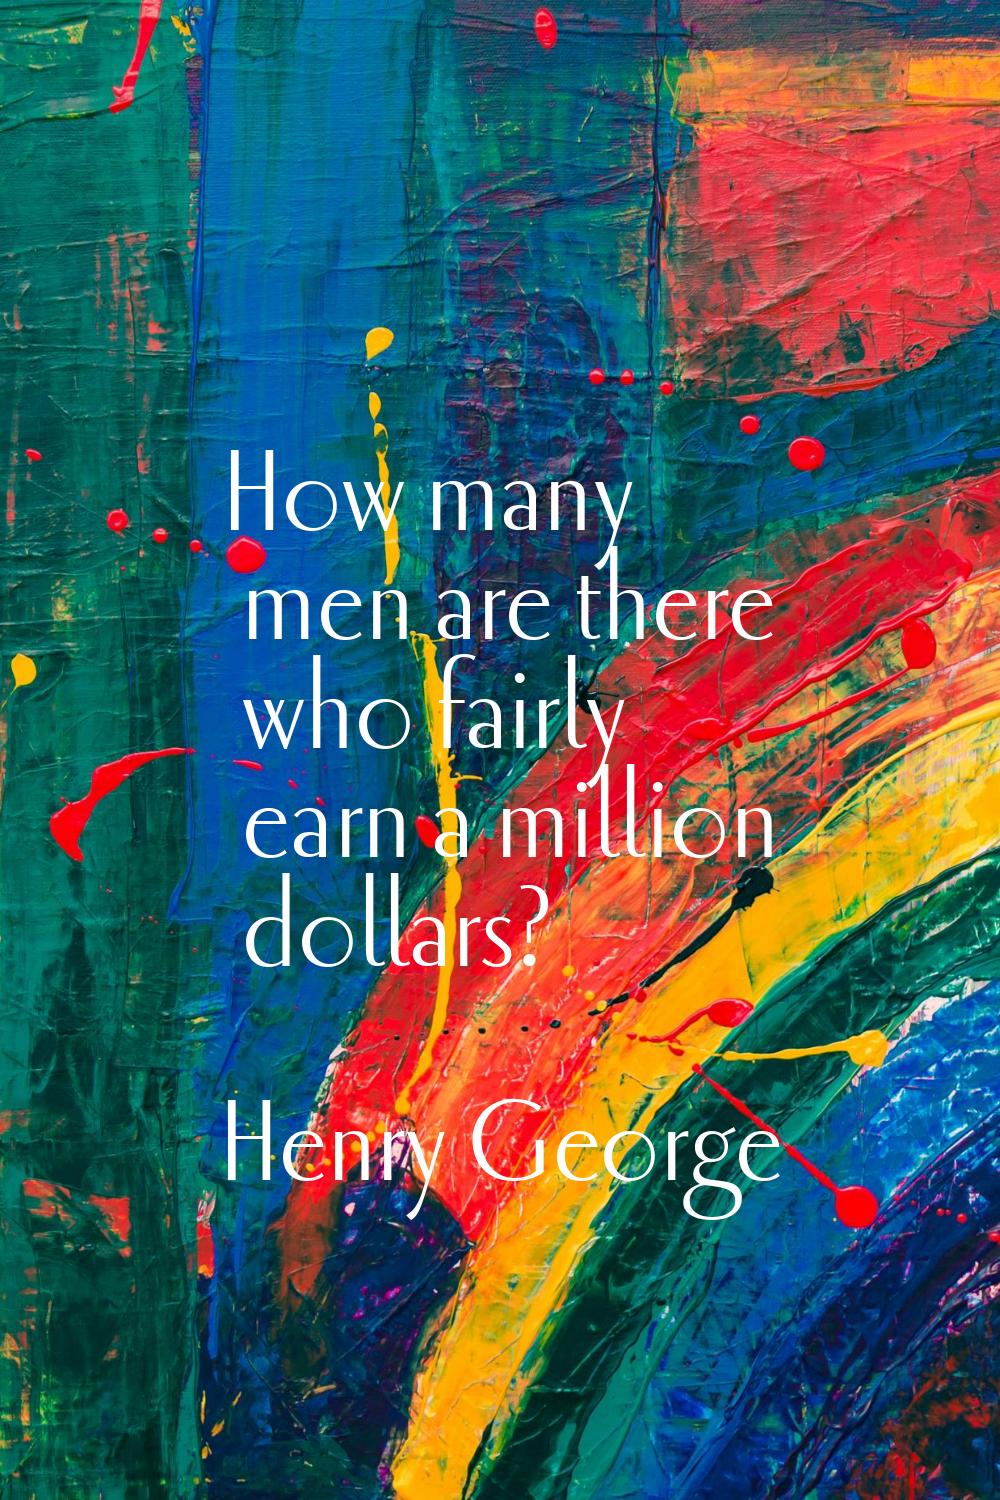 How many men are there who fairly earn a million dollars?